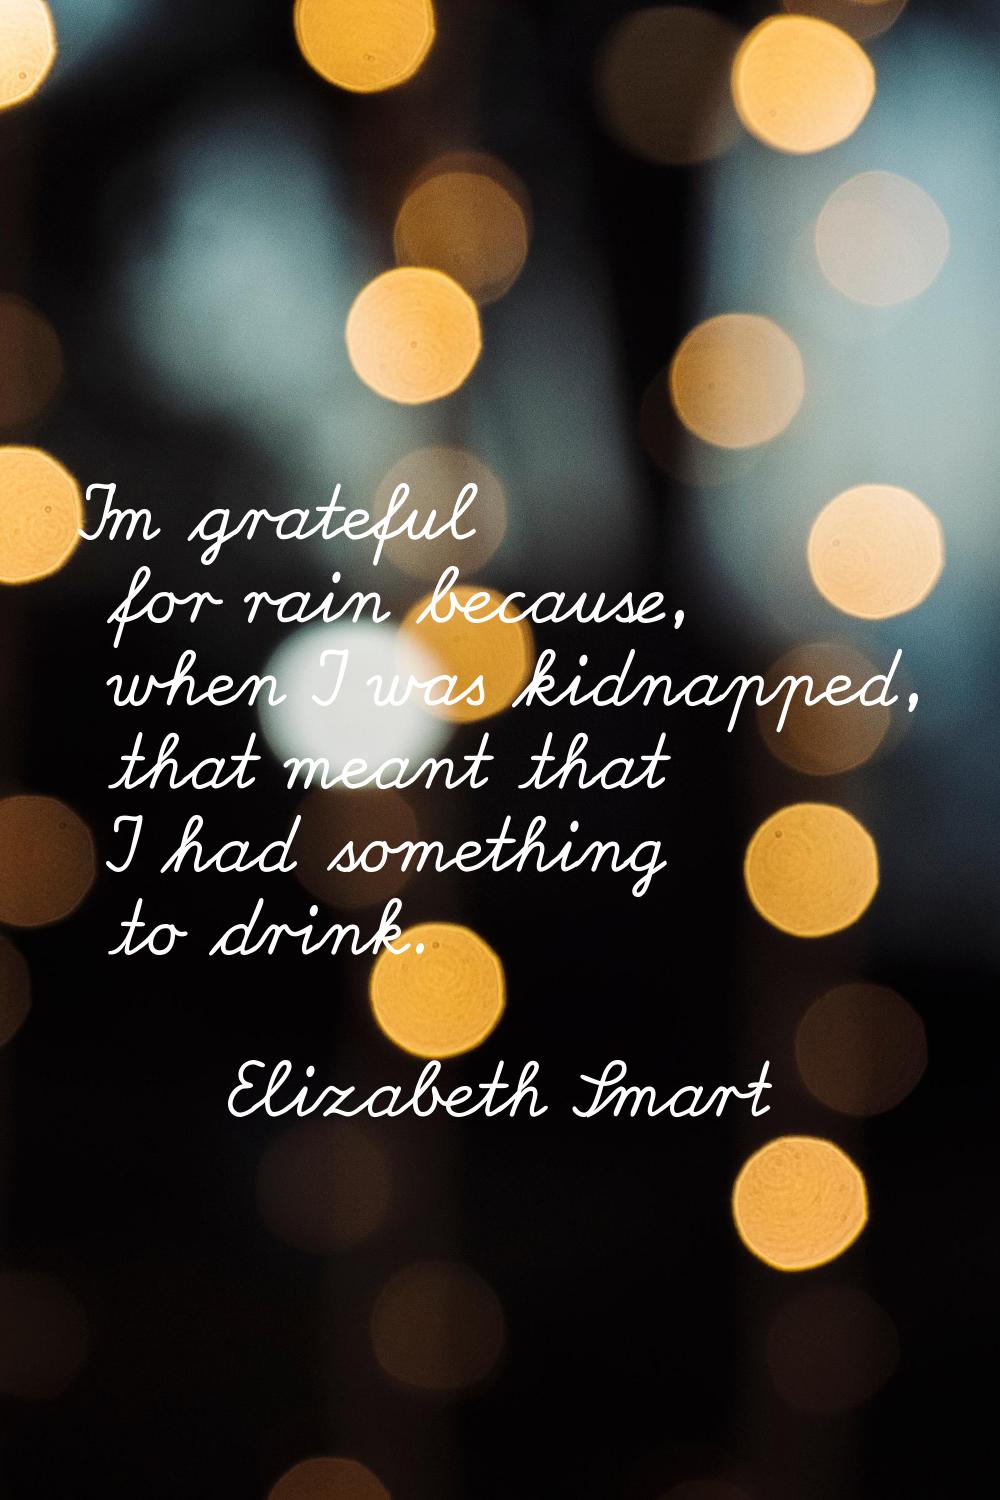 I'm grateful for rain because, when I was kidnapped, that meant that I had something to drink.